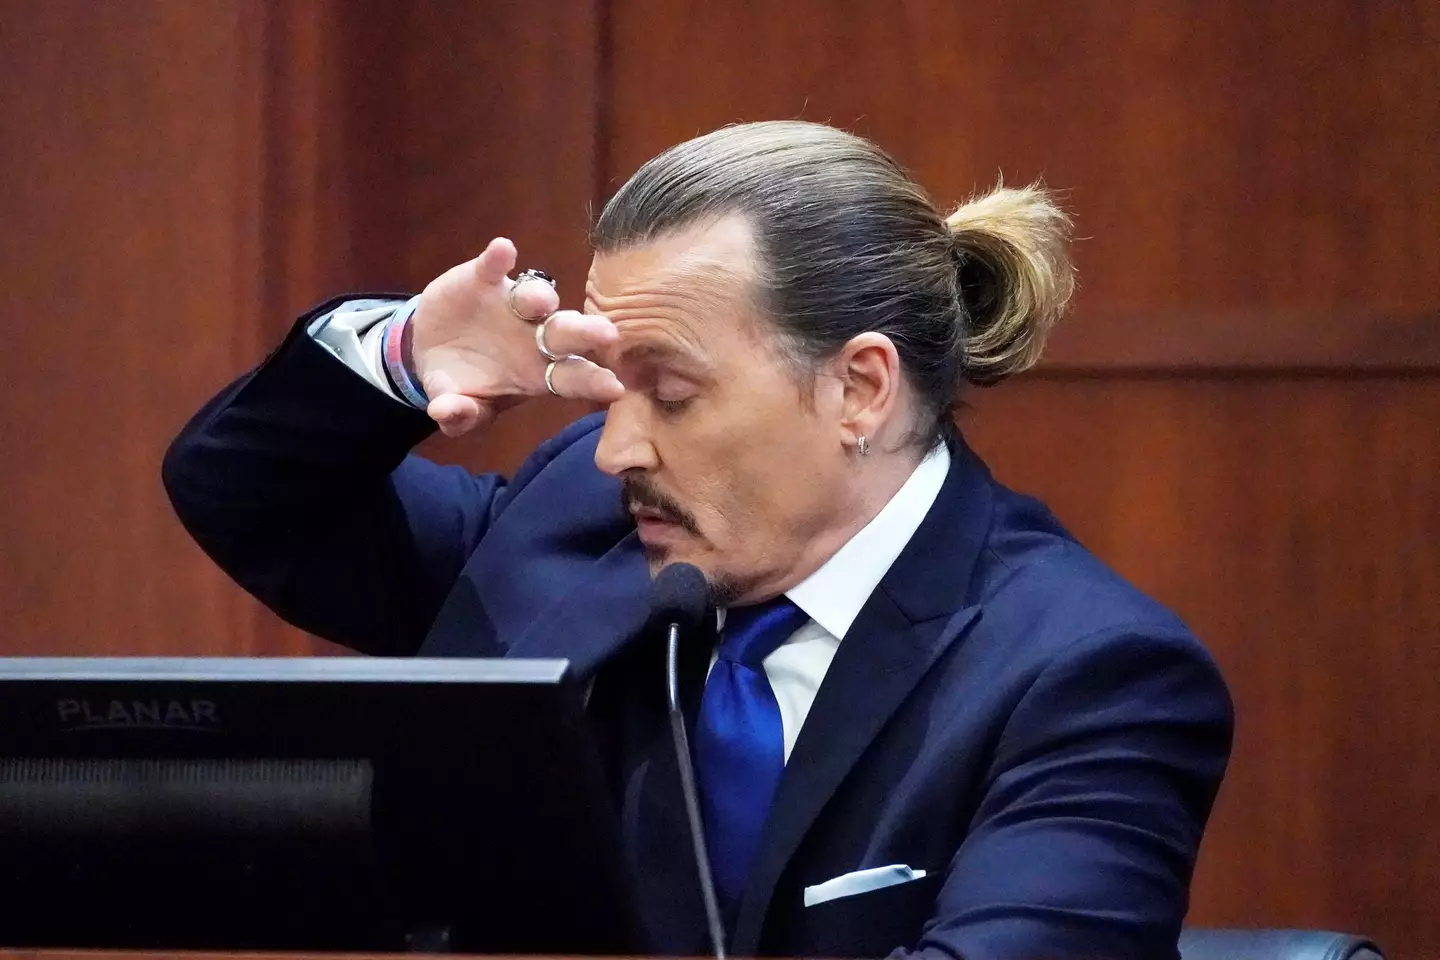 Johnny Depp was accused of 'overacting' in the trial by Howard Stern.